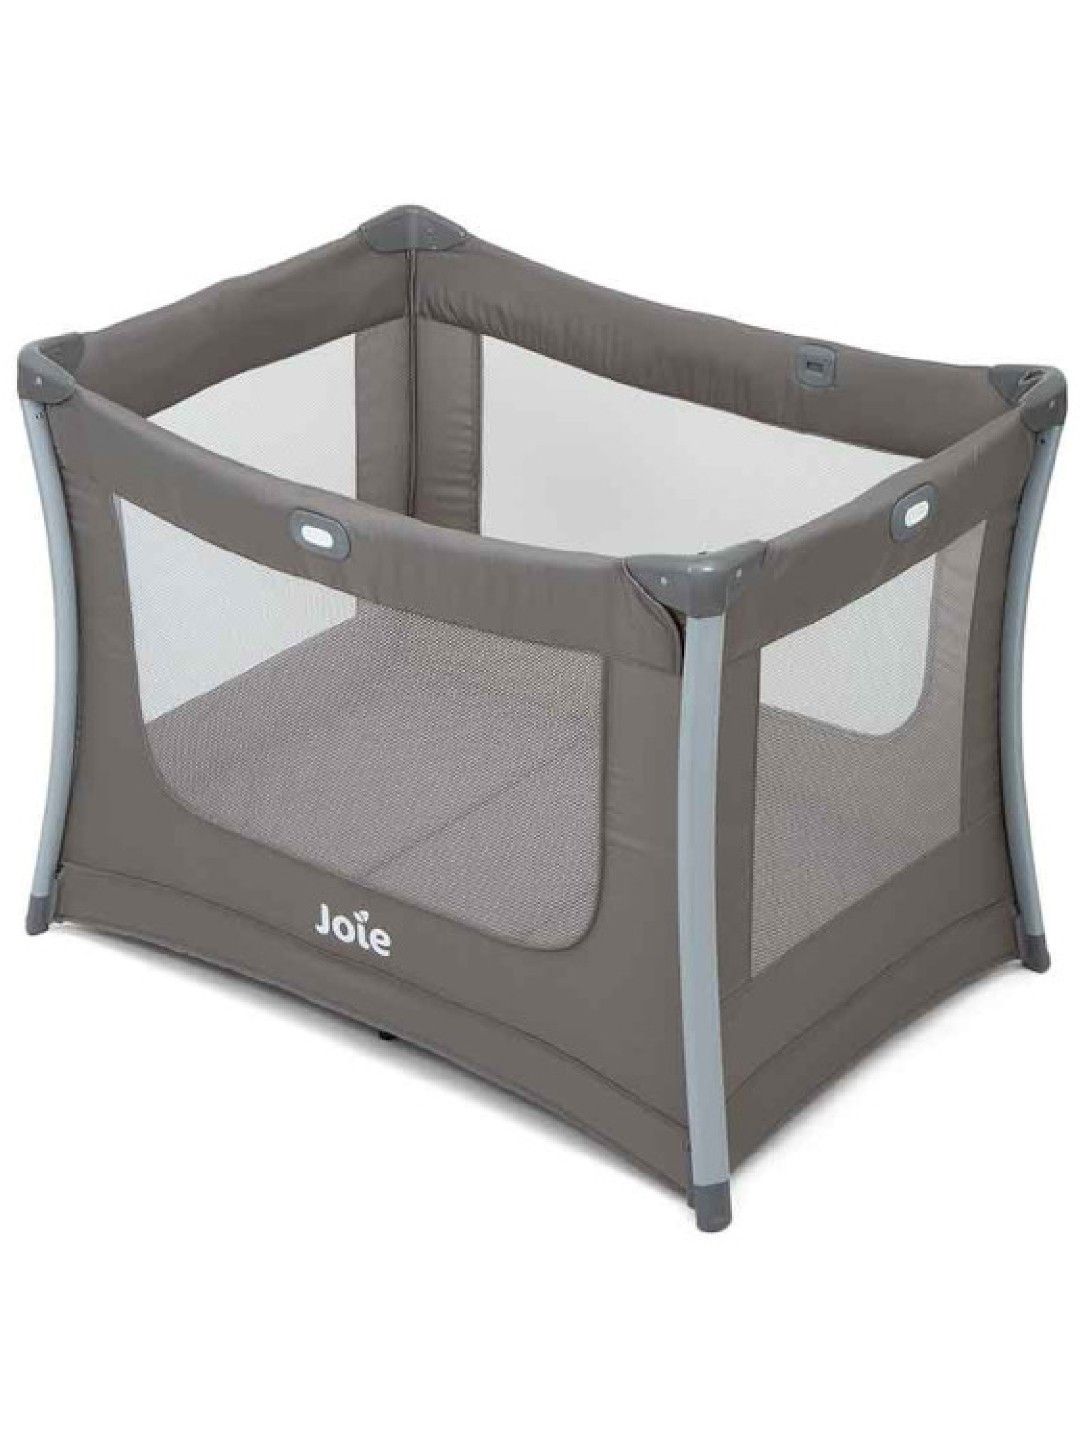 Joie Illusion with Bassinet and Insect Net Playard